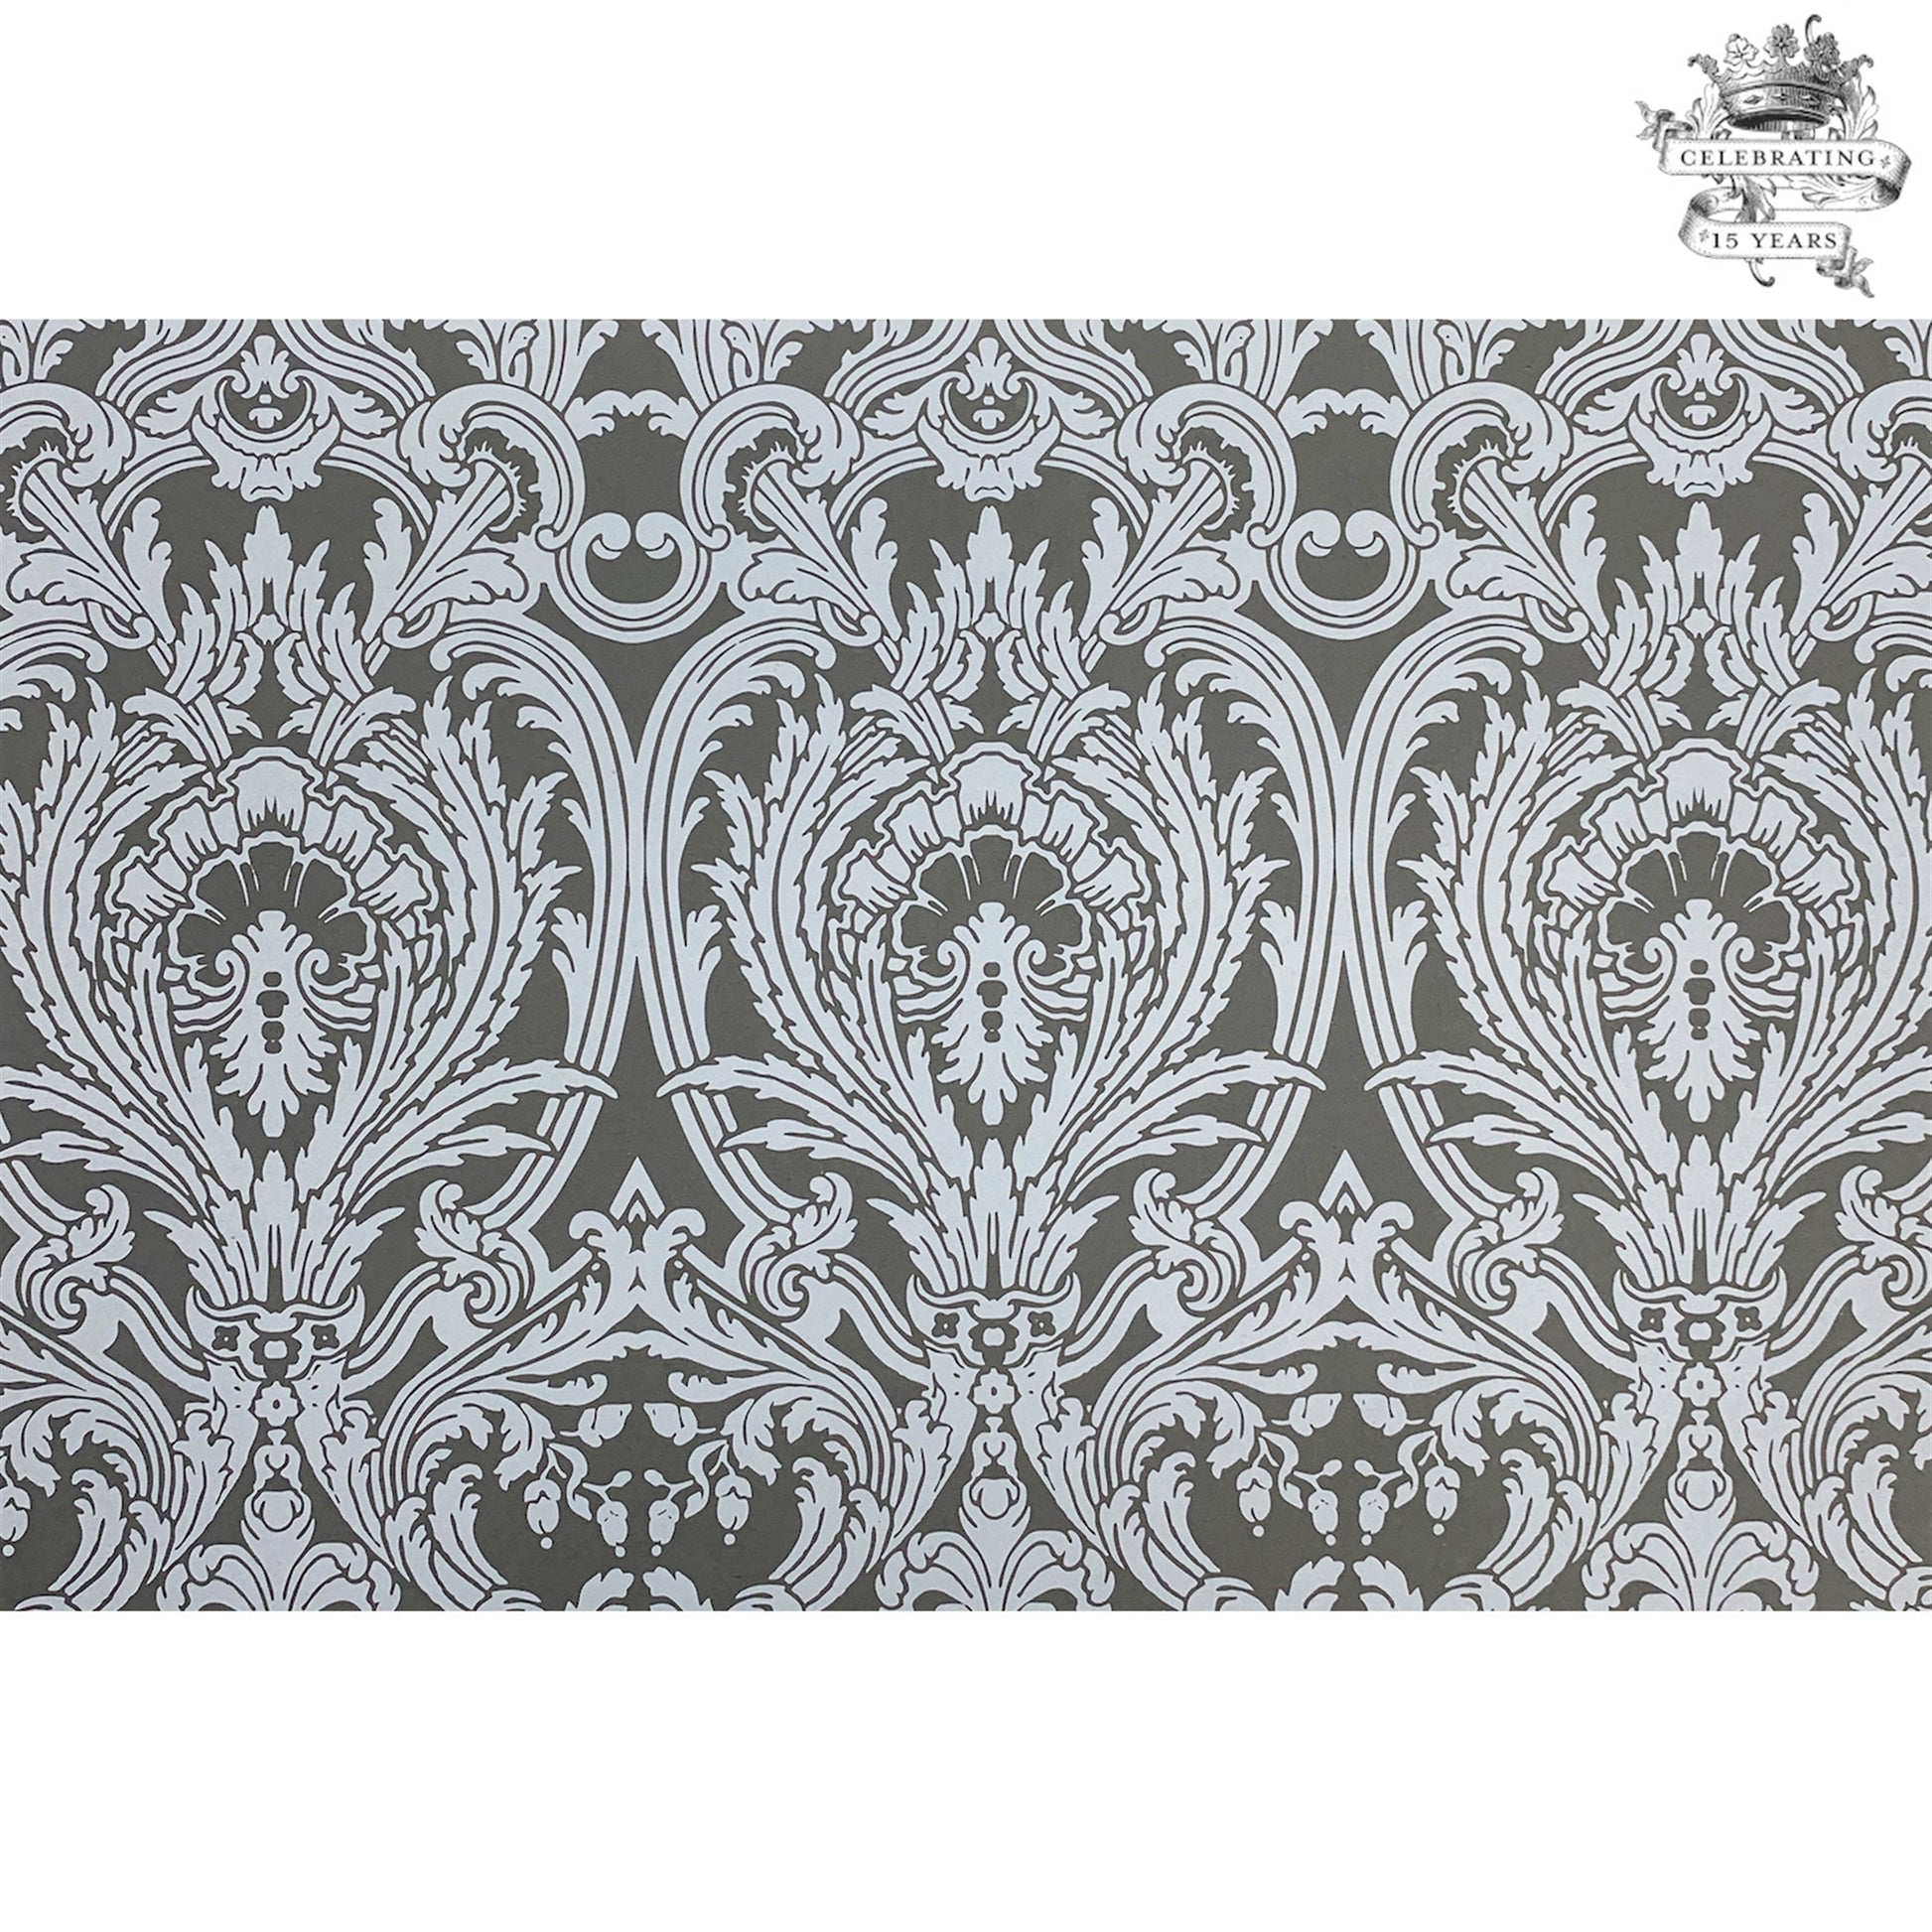 This Tapestry Anniversary Paper Placemat is in white ink on gray paper , very elegant